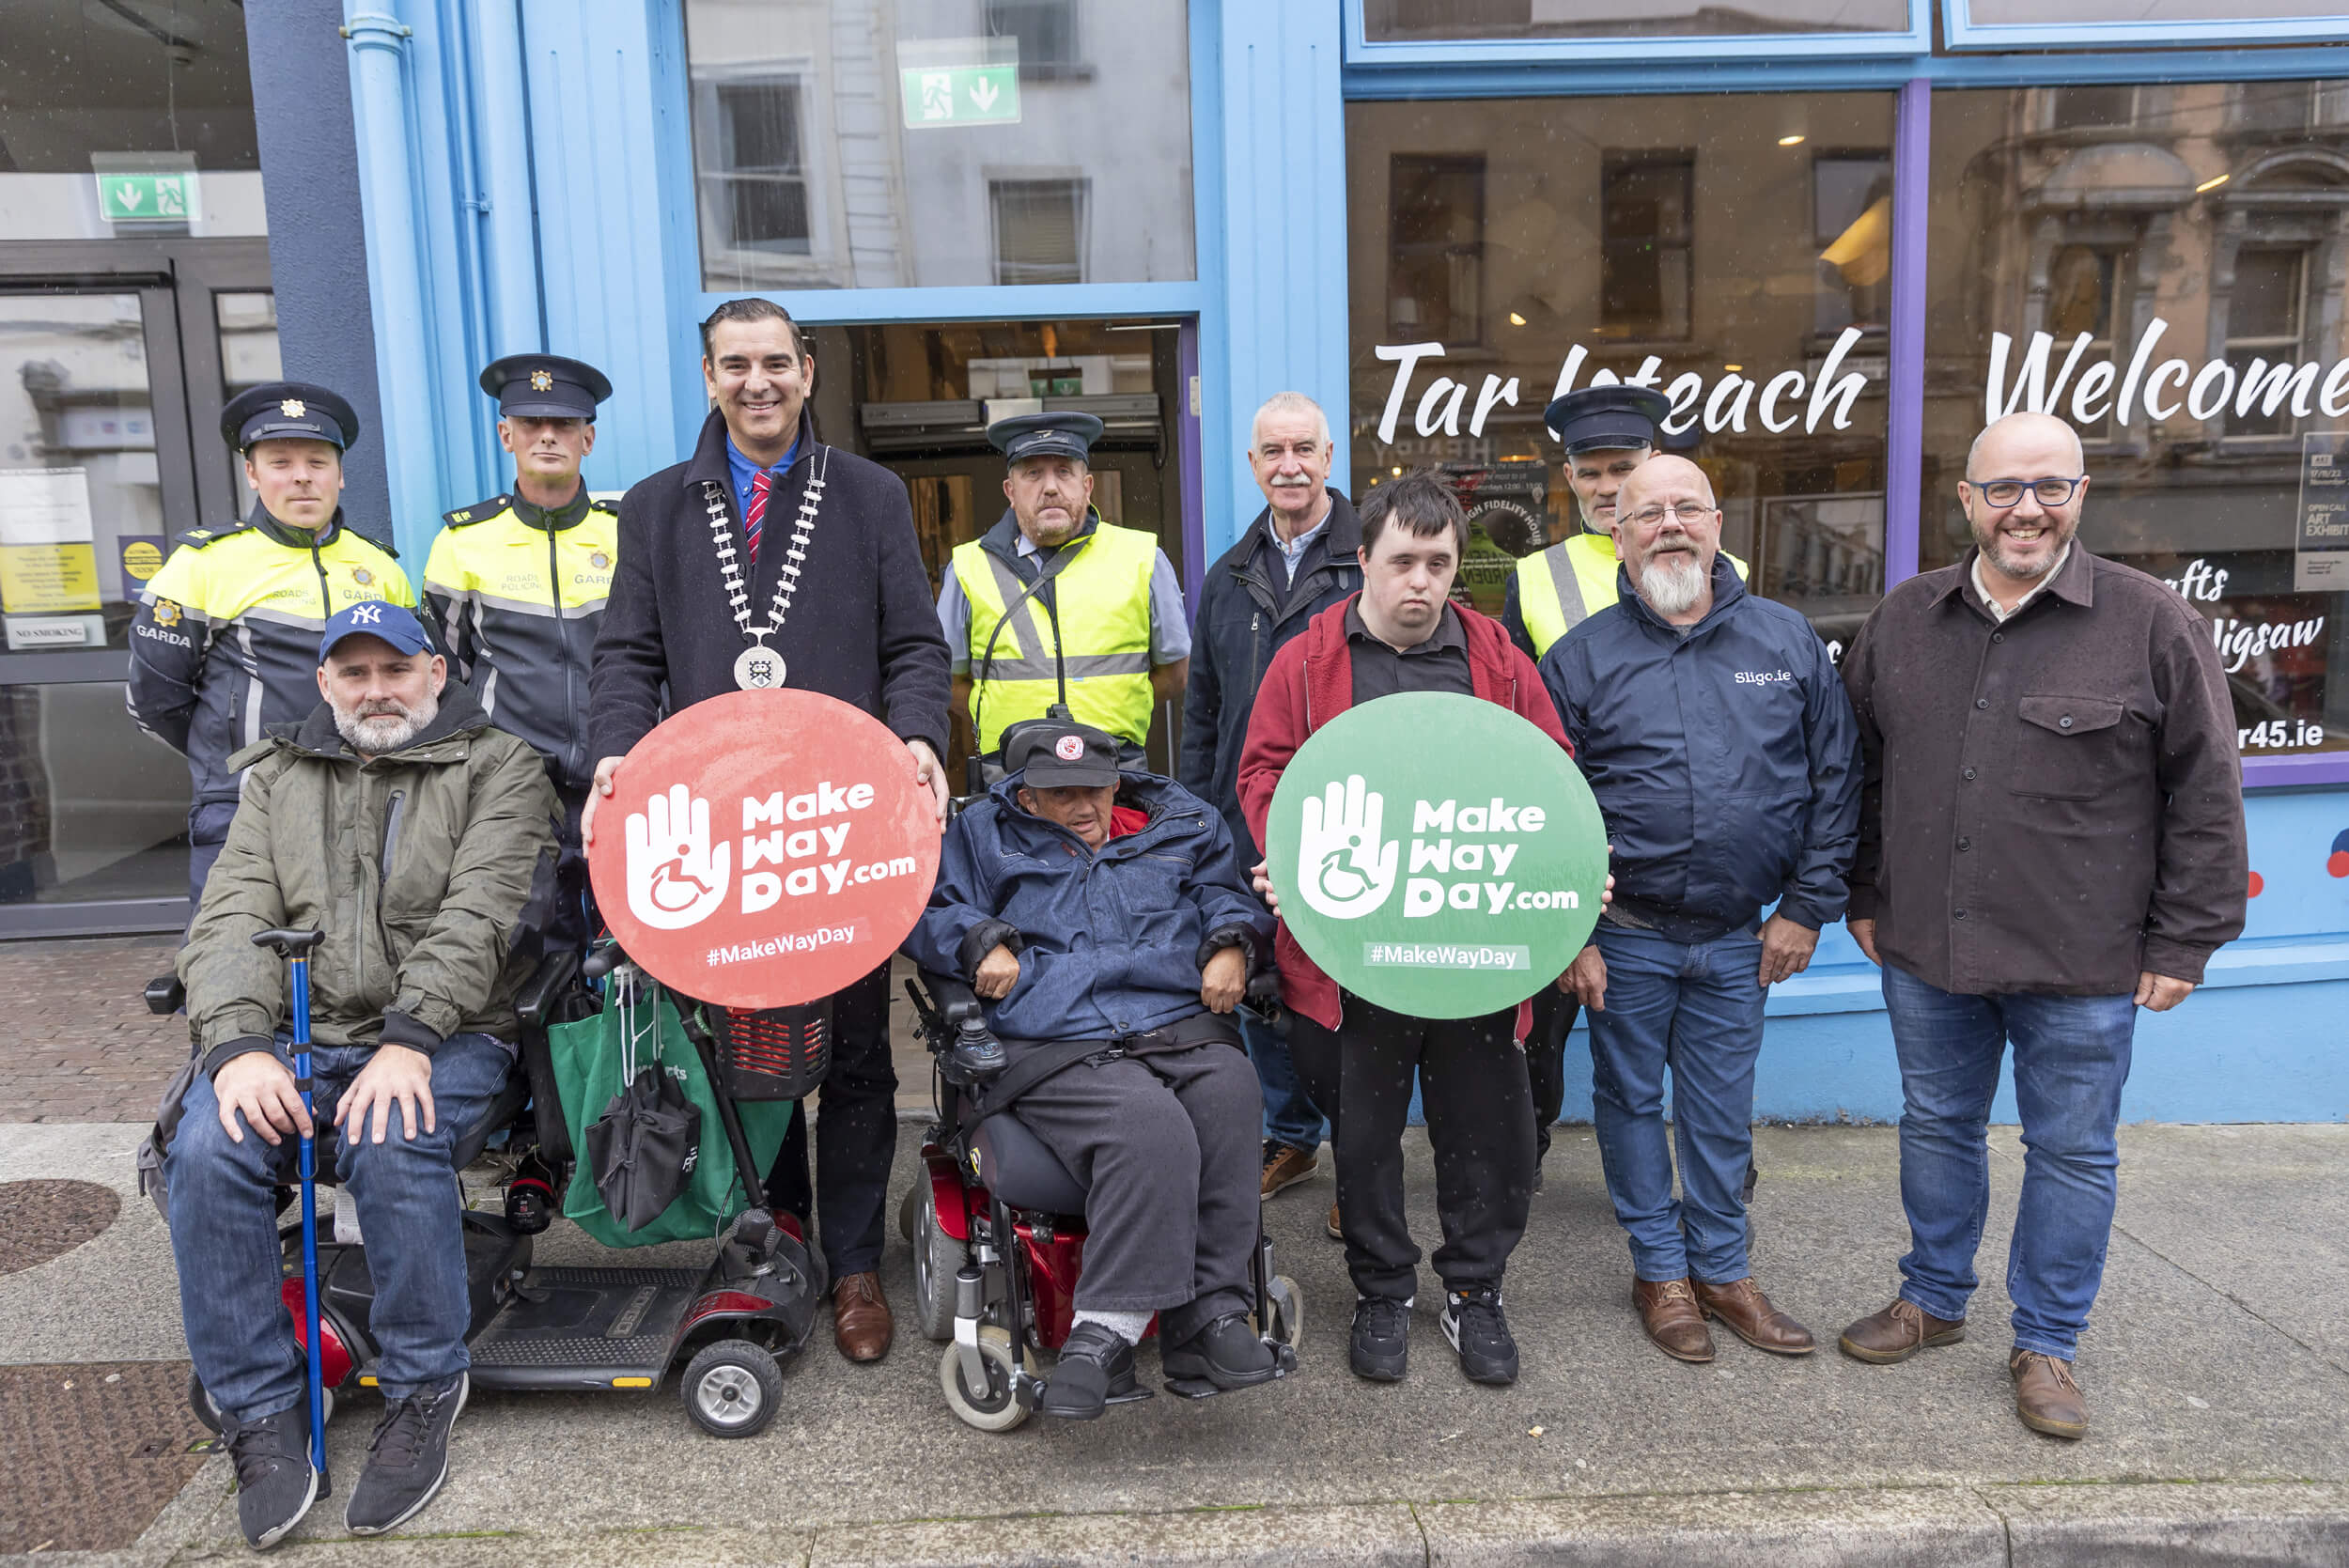 Highlighting issues facing people with disabilities - Make Way Day 2022 